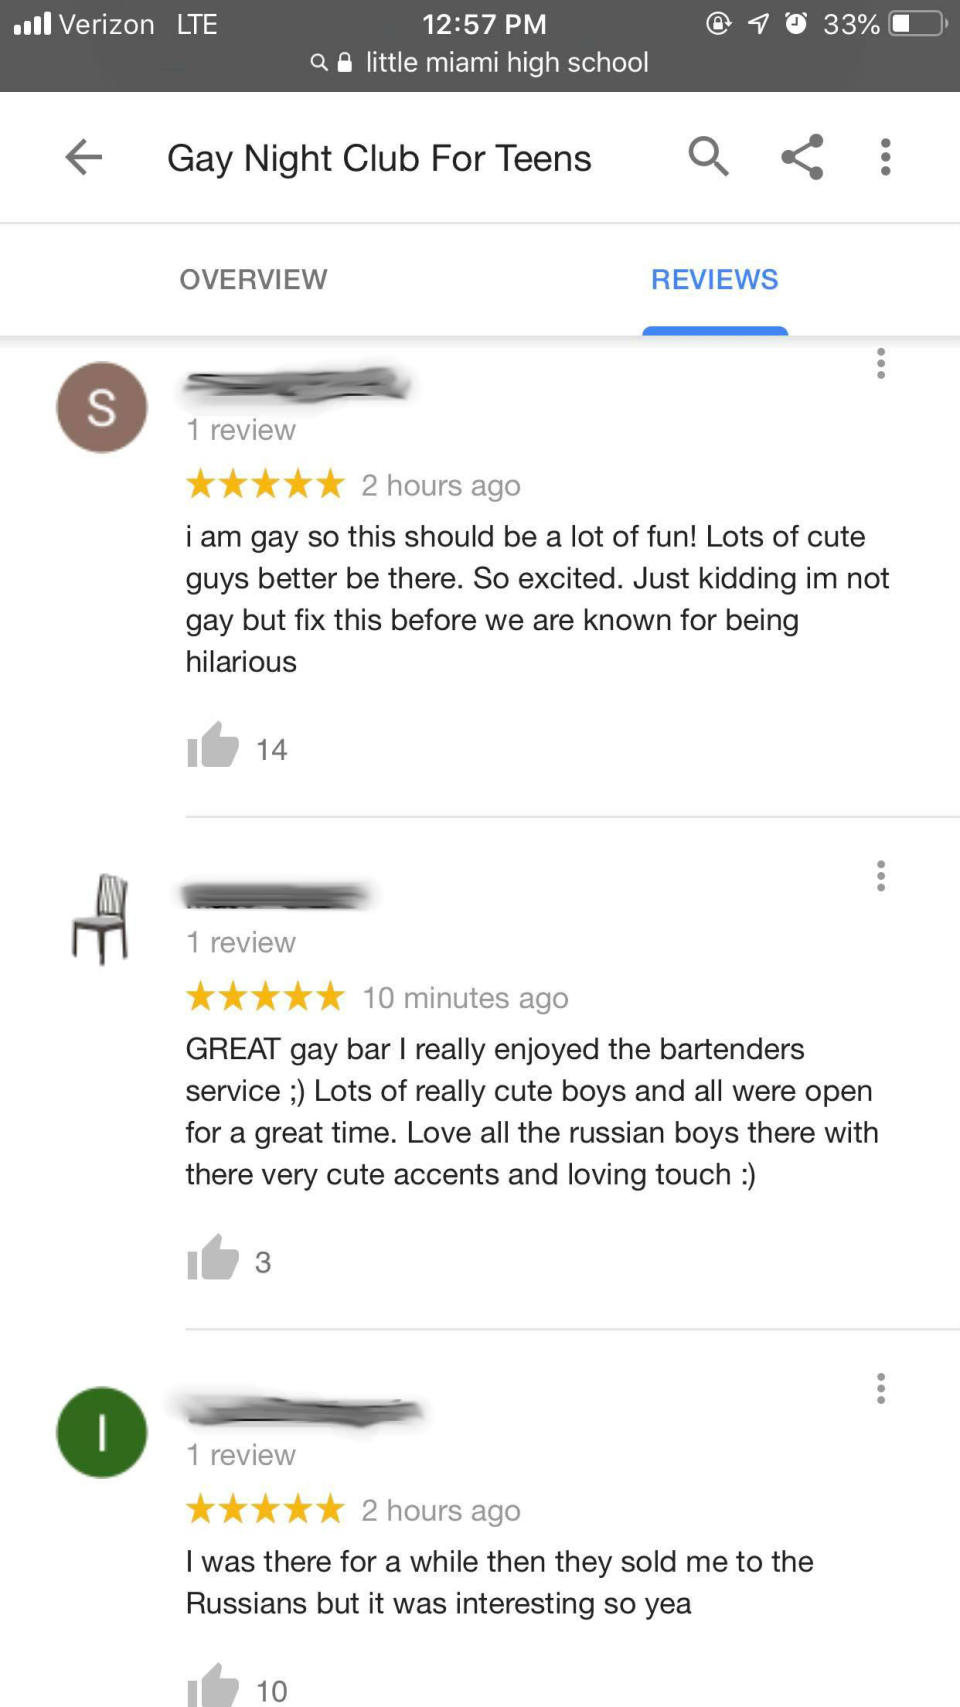 More reviews left on the school’s hacked Google page. (Image: Kayla Hayden)